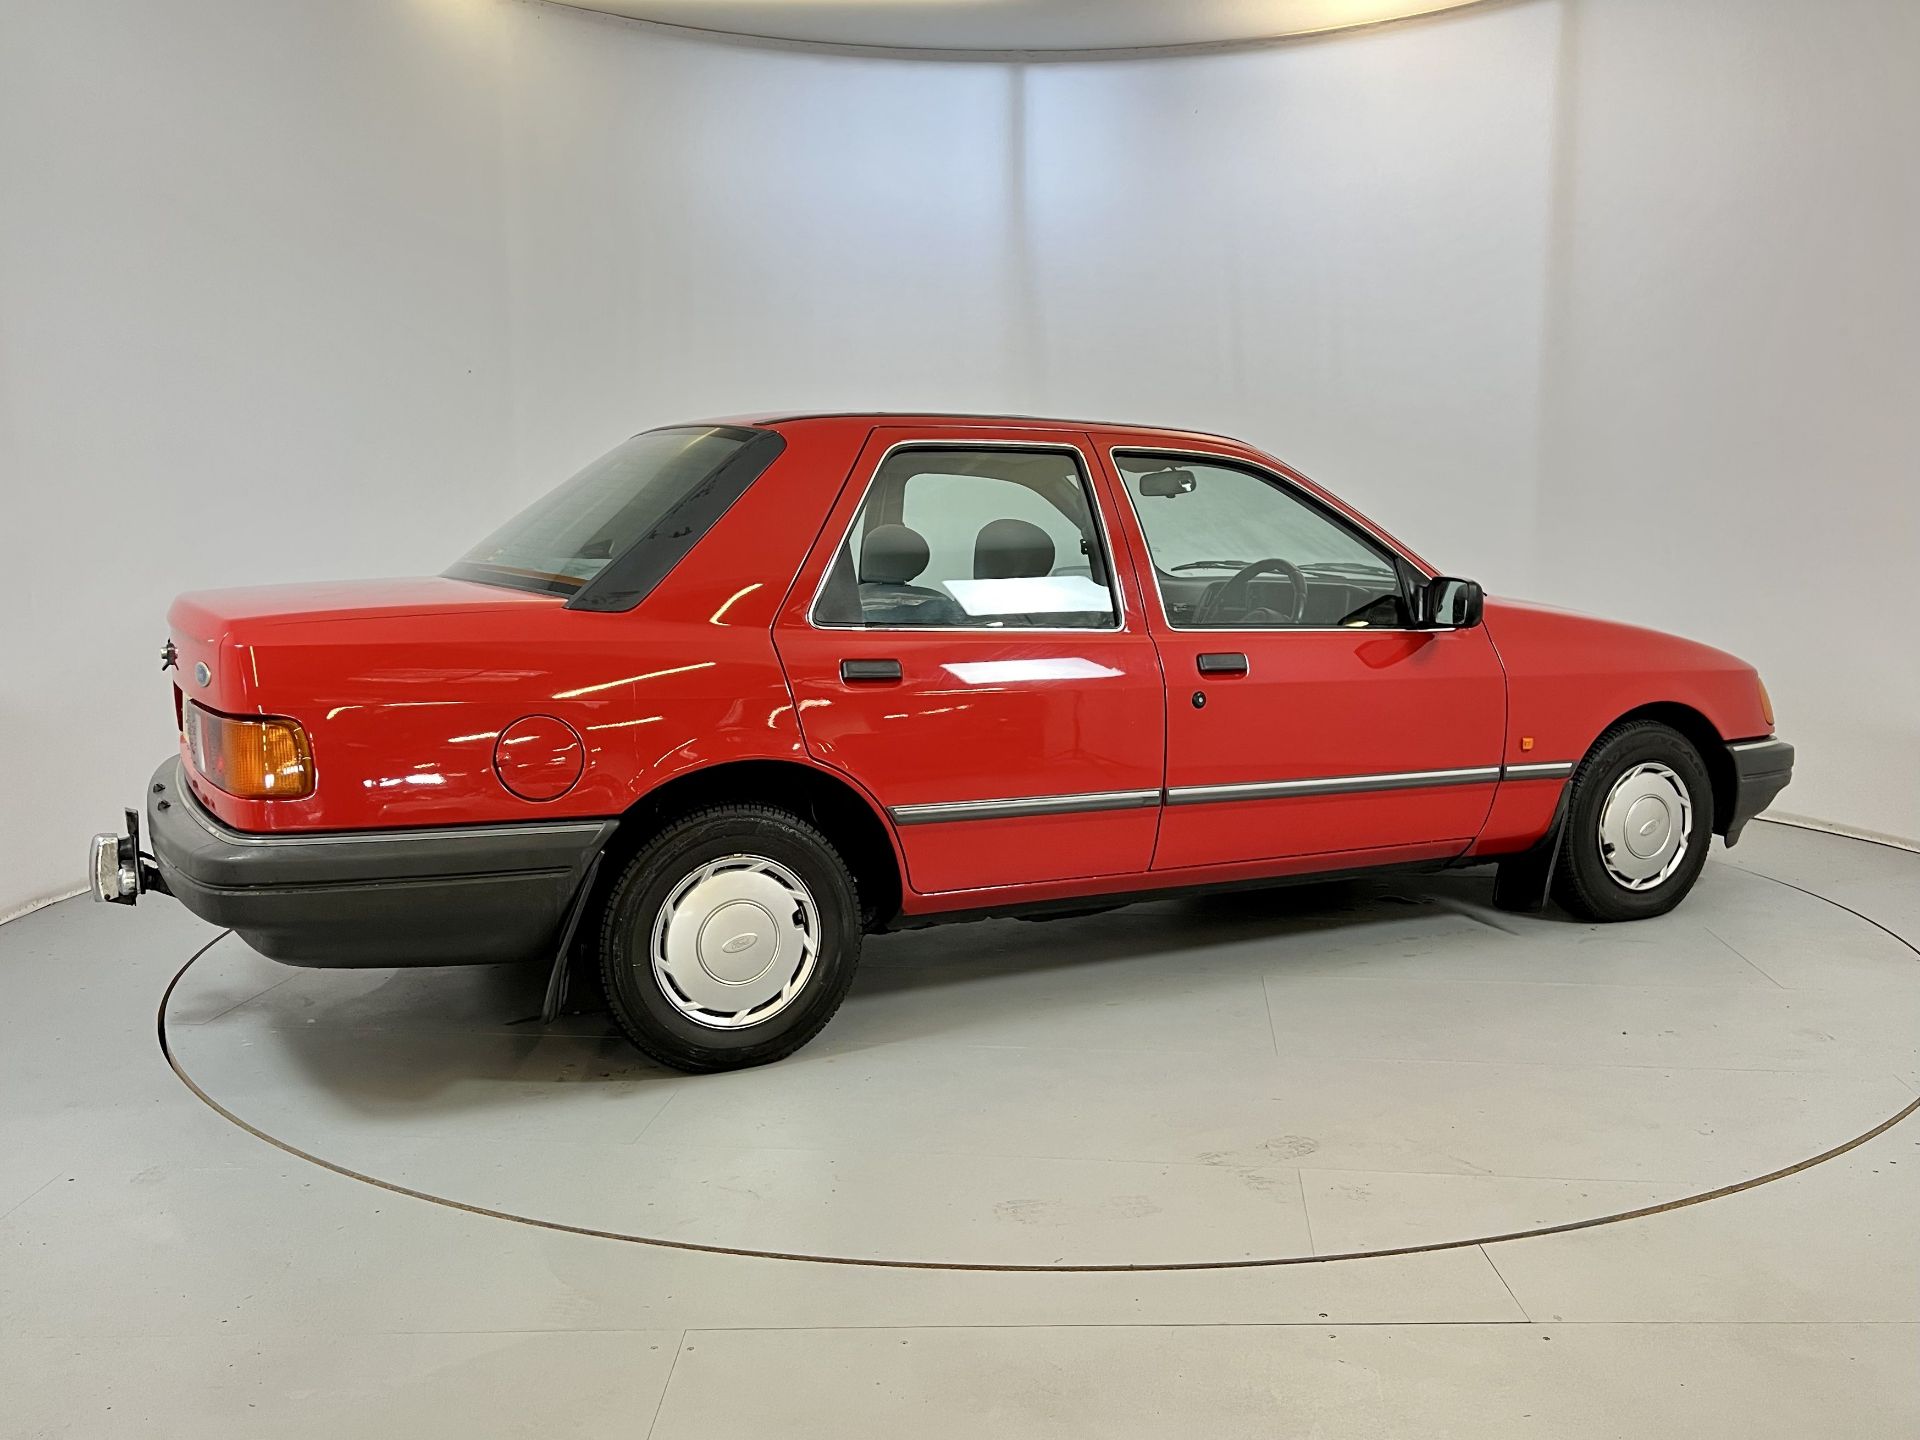 Ford Sierra Sapphire - Image 10 of 34